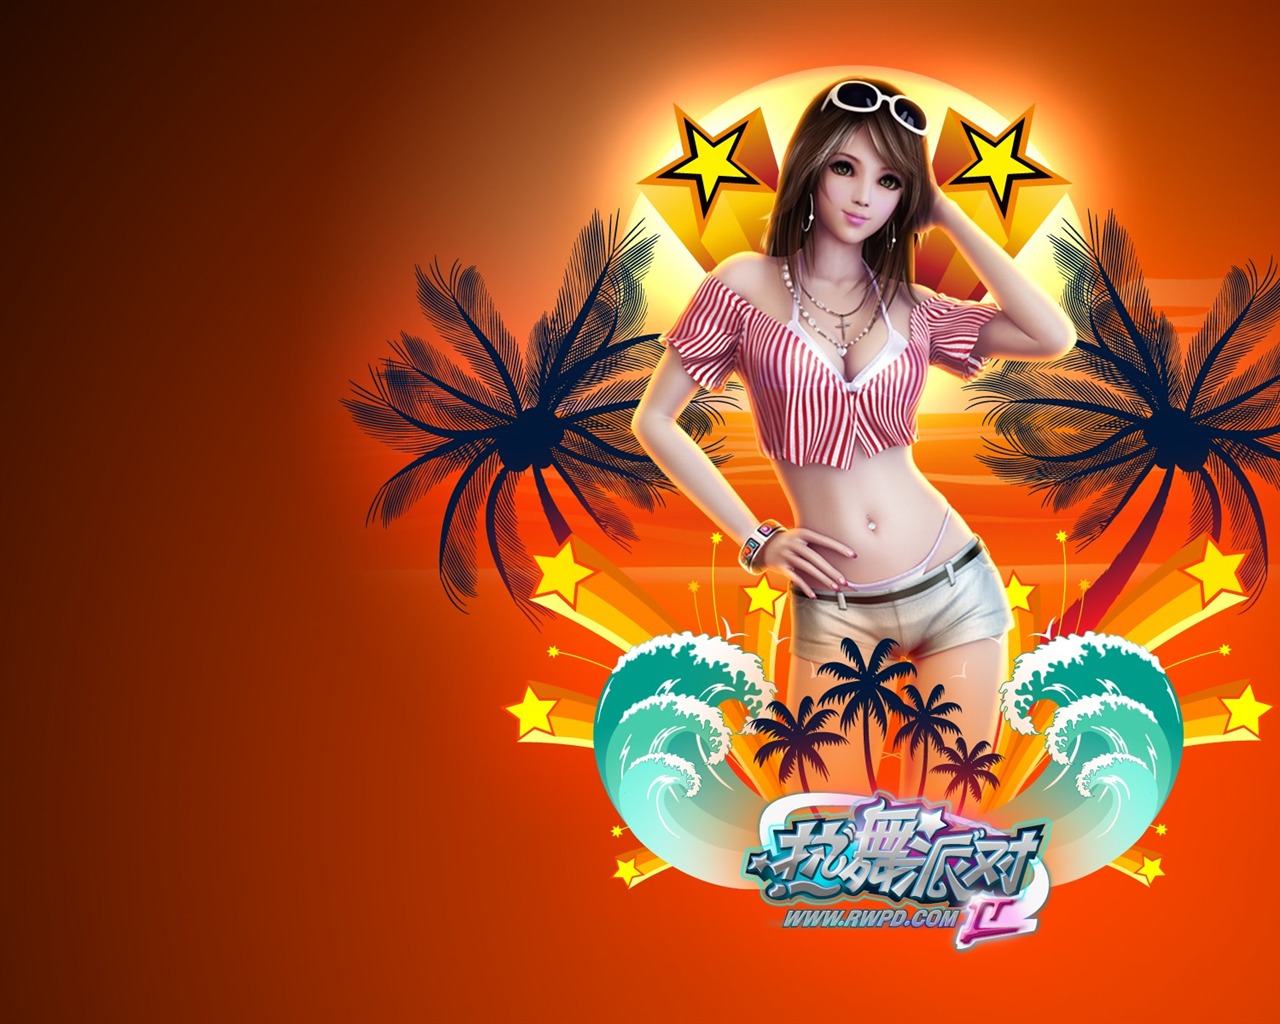 Online game Hot Dance Party II official wallpapers #3 - 1280x1024